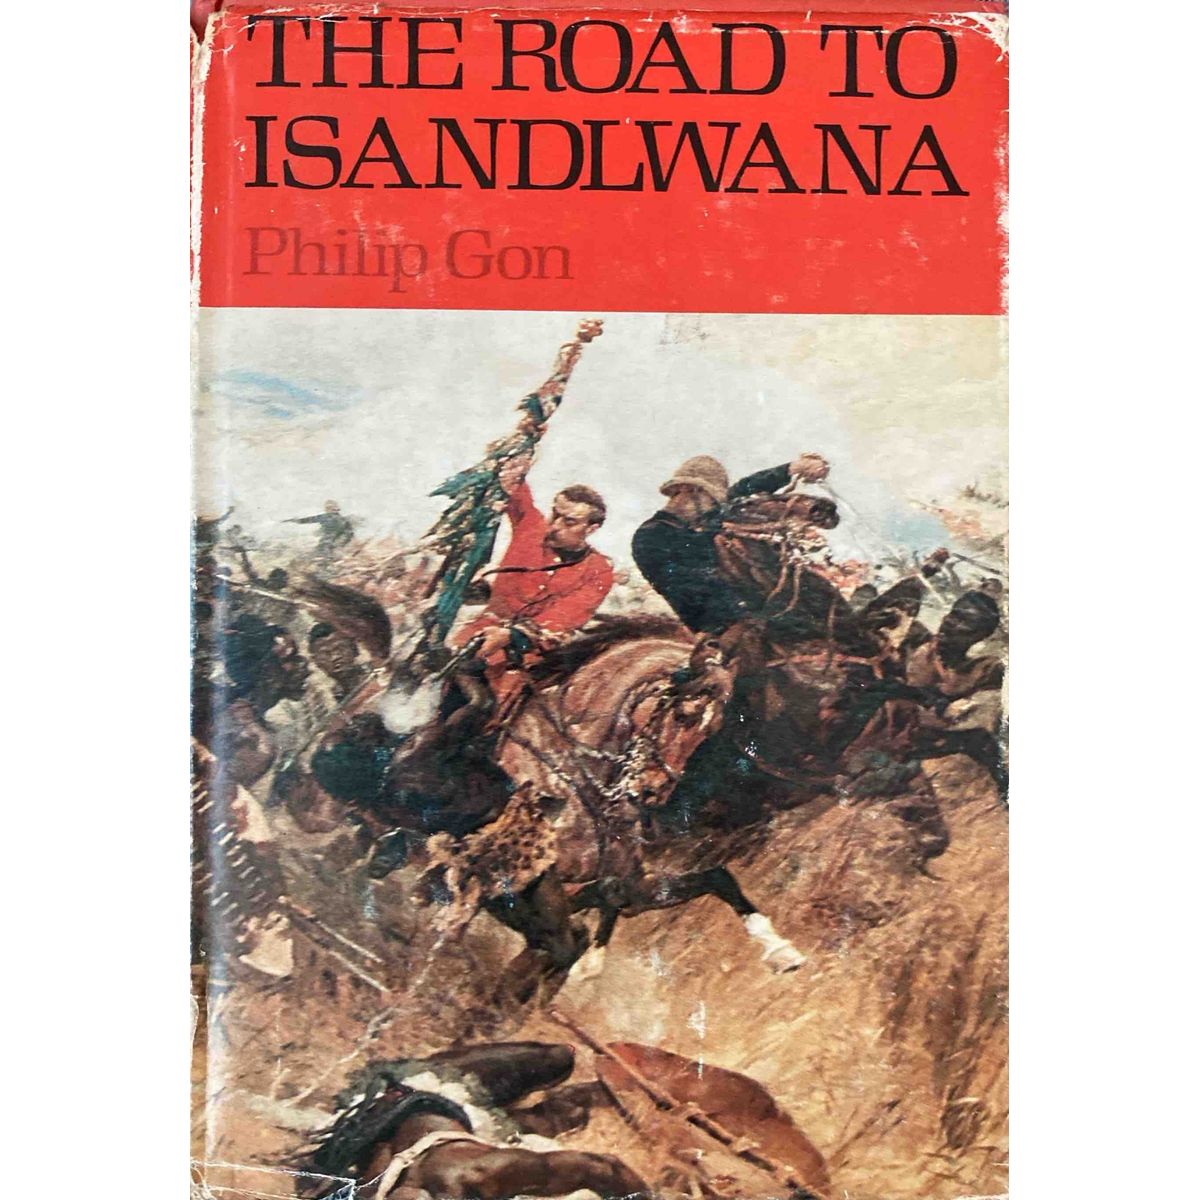 ISBN: 9780949937650 / 0949937657 - The Road to Isandlwana: The Years of an Imperial Battalion by Philip Gon, 1st Edition [1979]